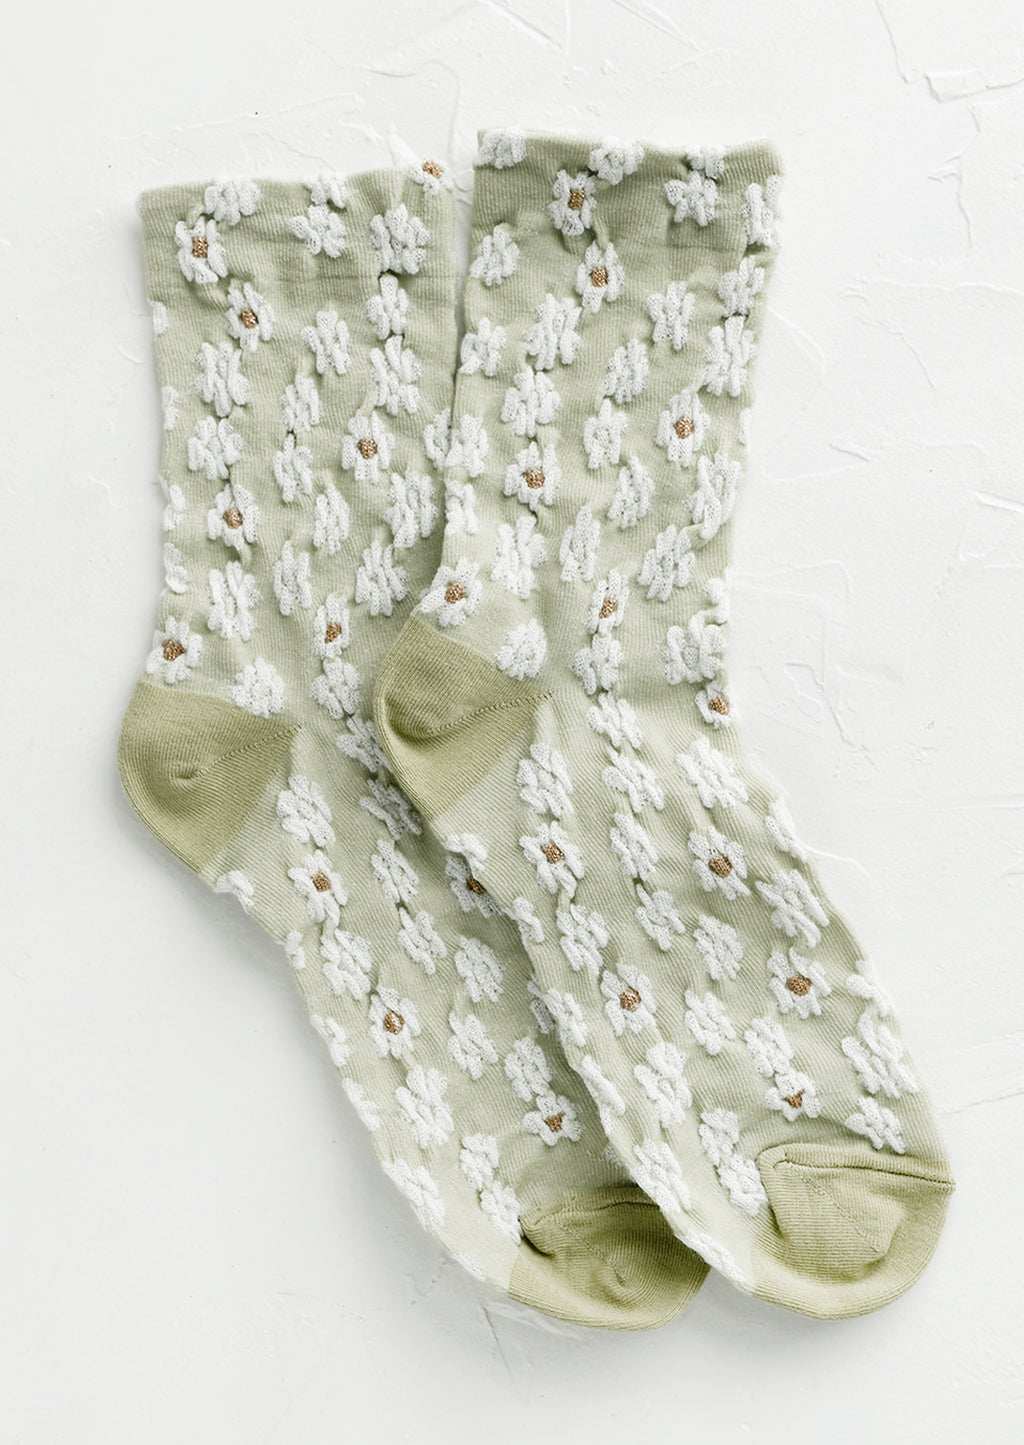 Mint: A pair of non-sheer yellow socks in mint with allover white daisy pattern.